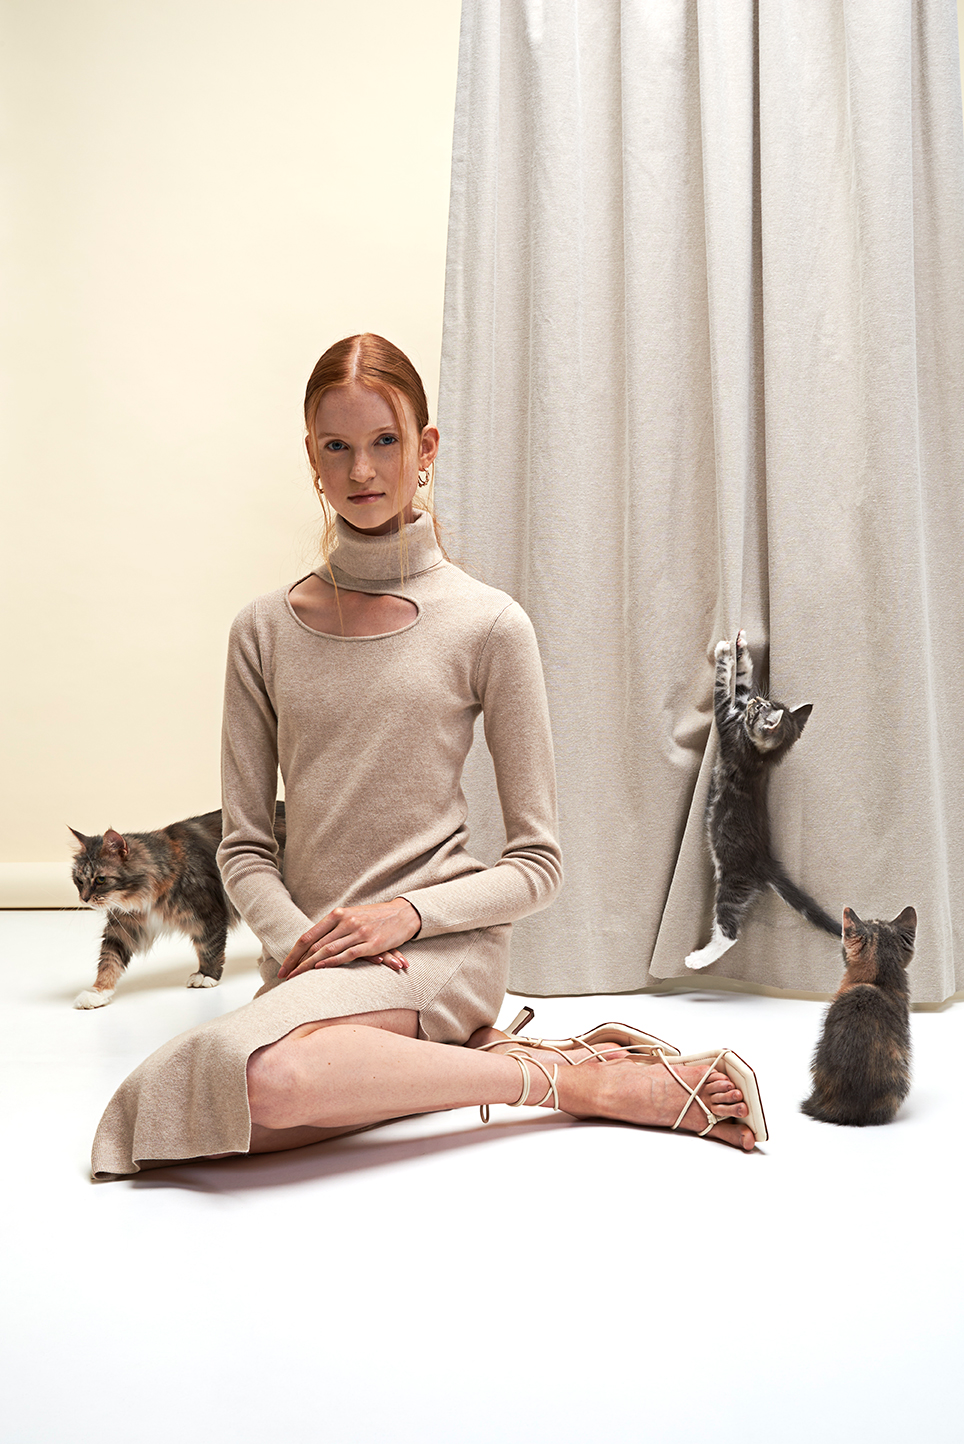 Model sitting in front of a curtain while kittens are climbing in the curtains.